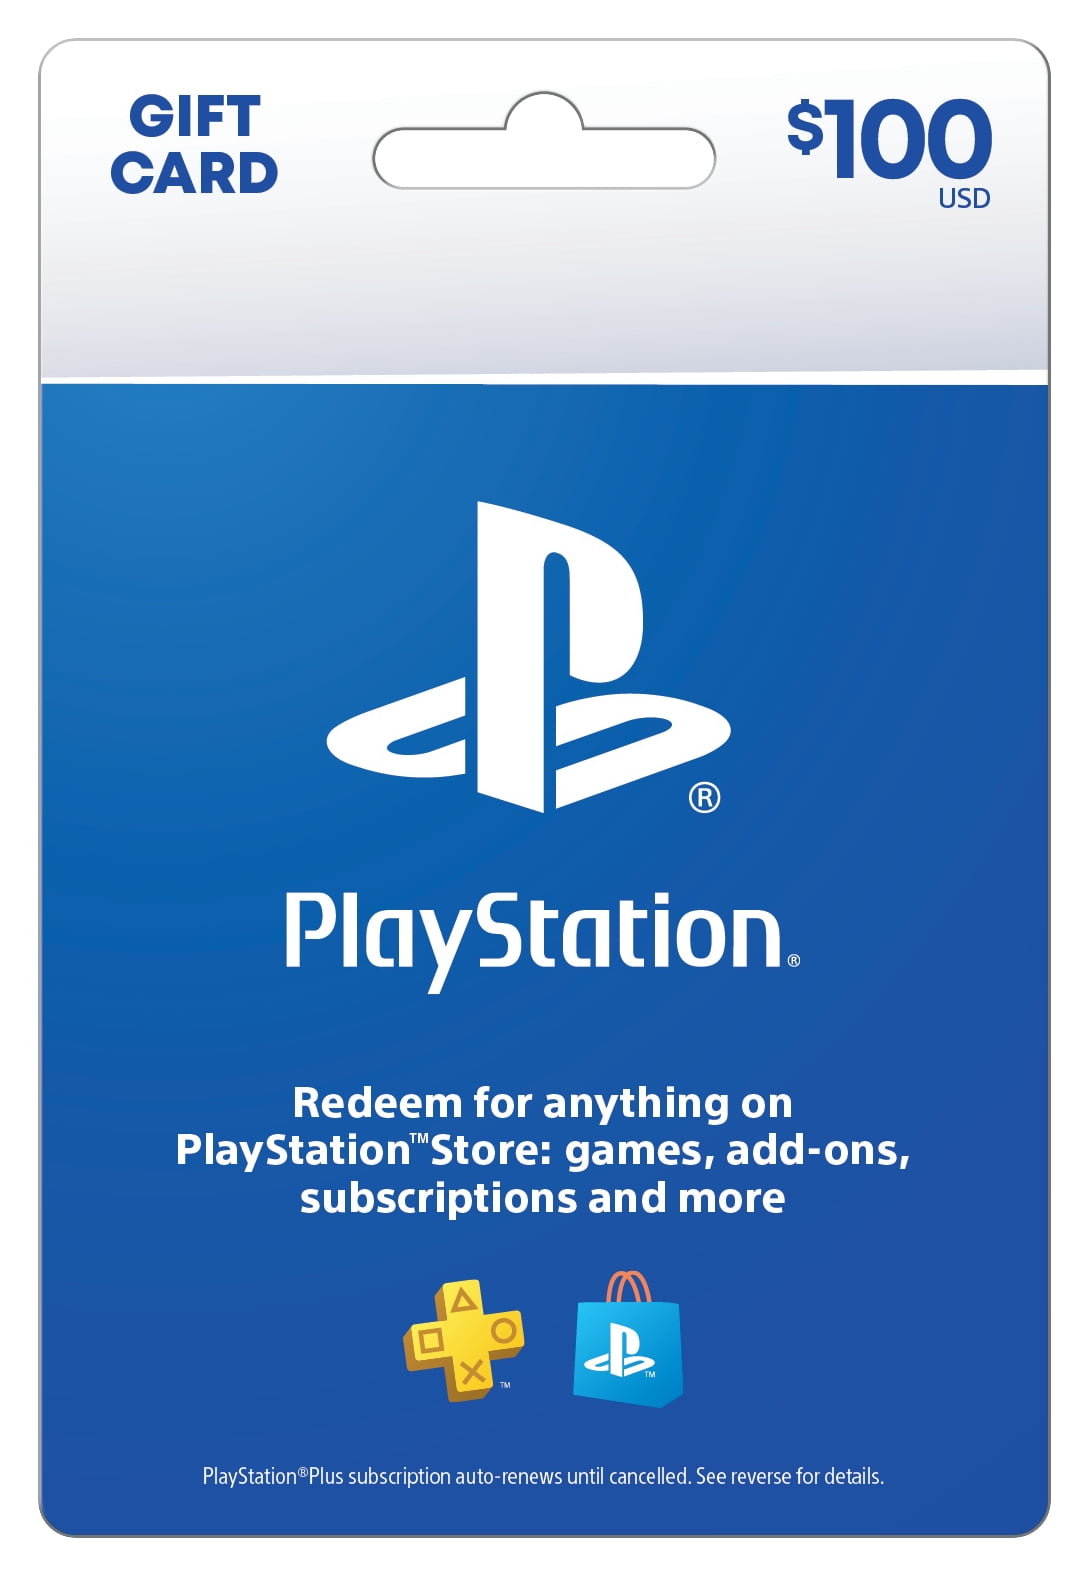 How to make a purchase from PlayStation™Store